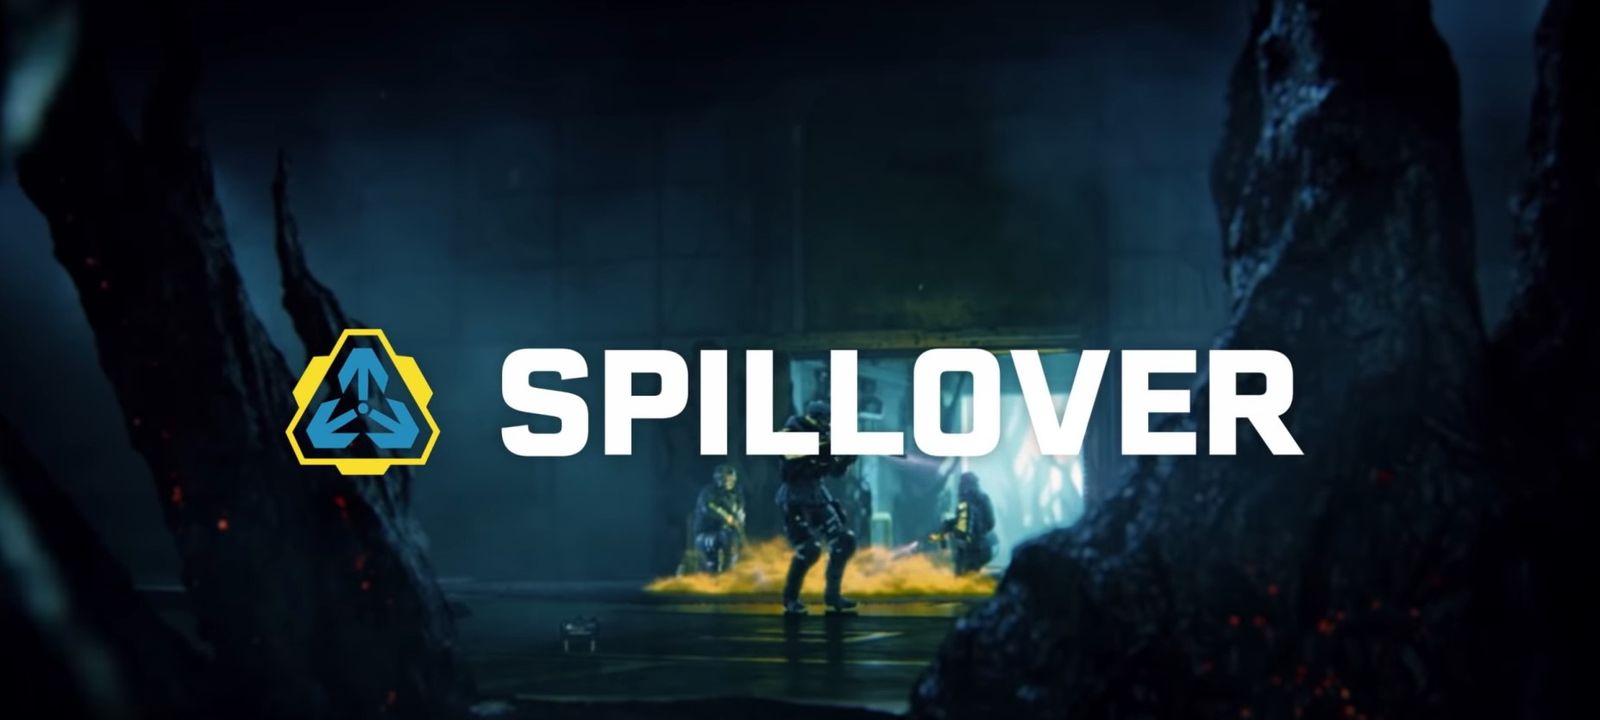 The Spillover is the first multi-week Crisis Event in Rainbow Six Extraction.